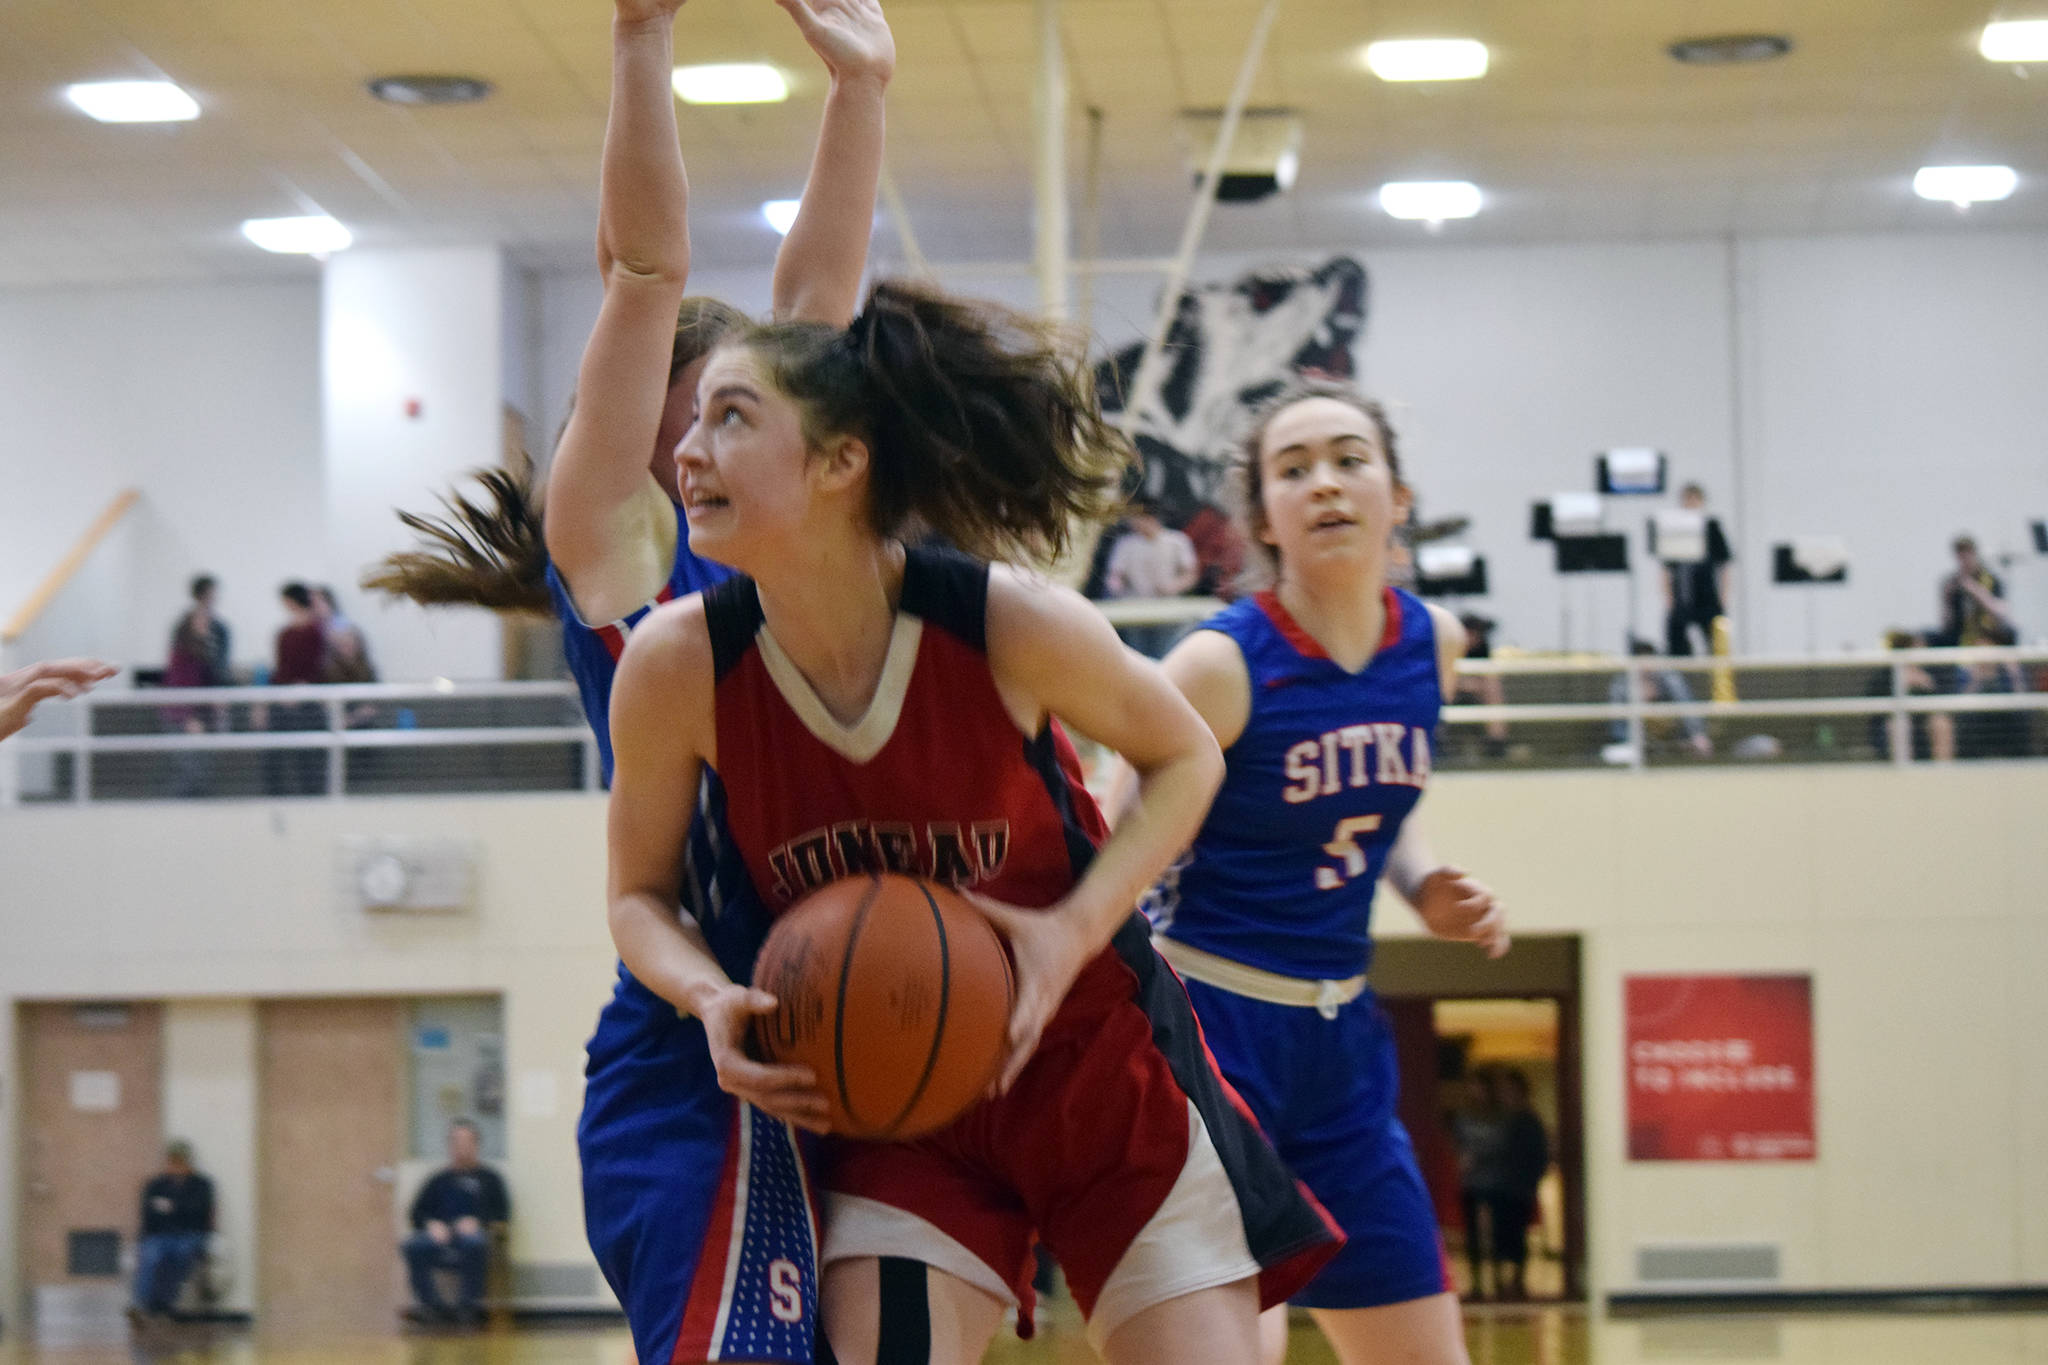 Juneau-Douglas High School: Yadaat.at Kale’s Kendyl Carson gets around a Sitka defender in the fourth quarter in the Princess Cruises Capital City Classic at JDHS on Monday, Dec. 30, 2019. (Nolin Ainsworth | Juneau Empire)